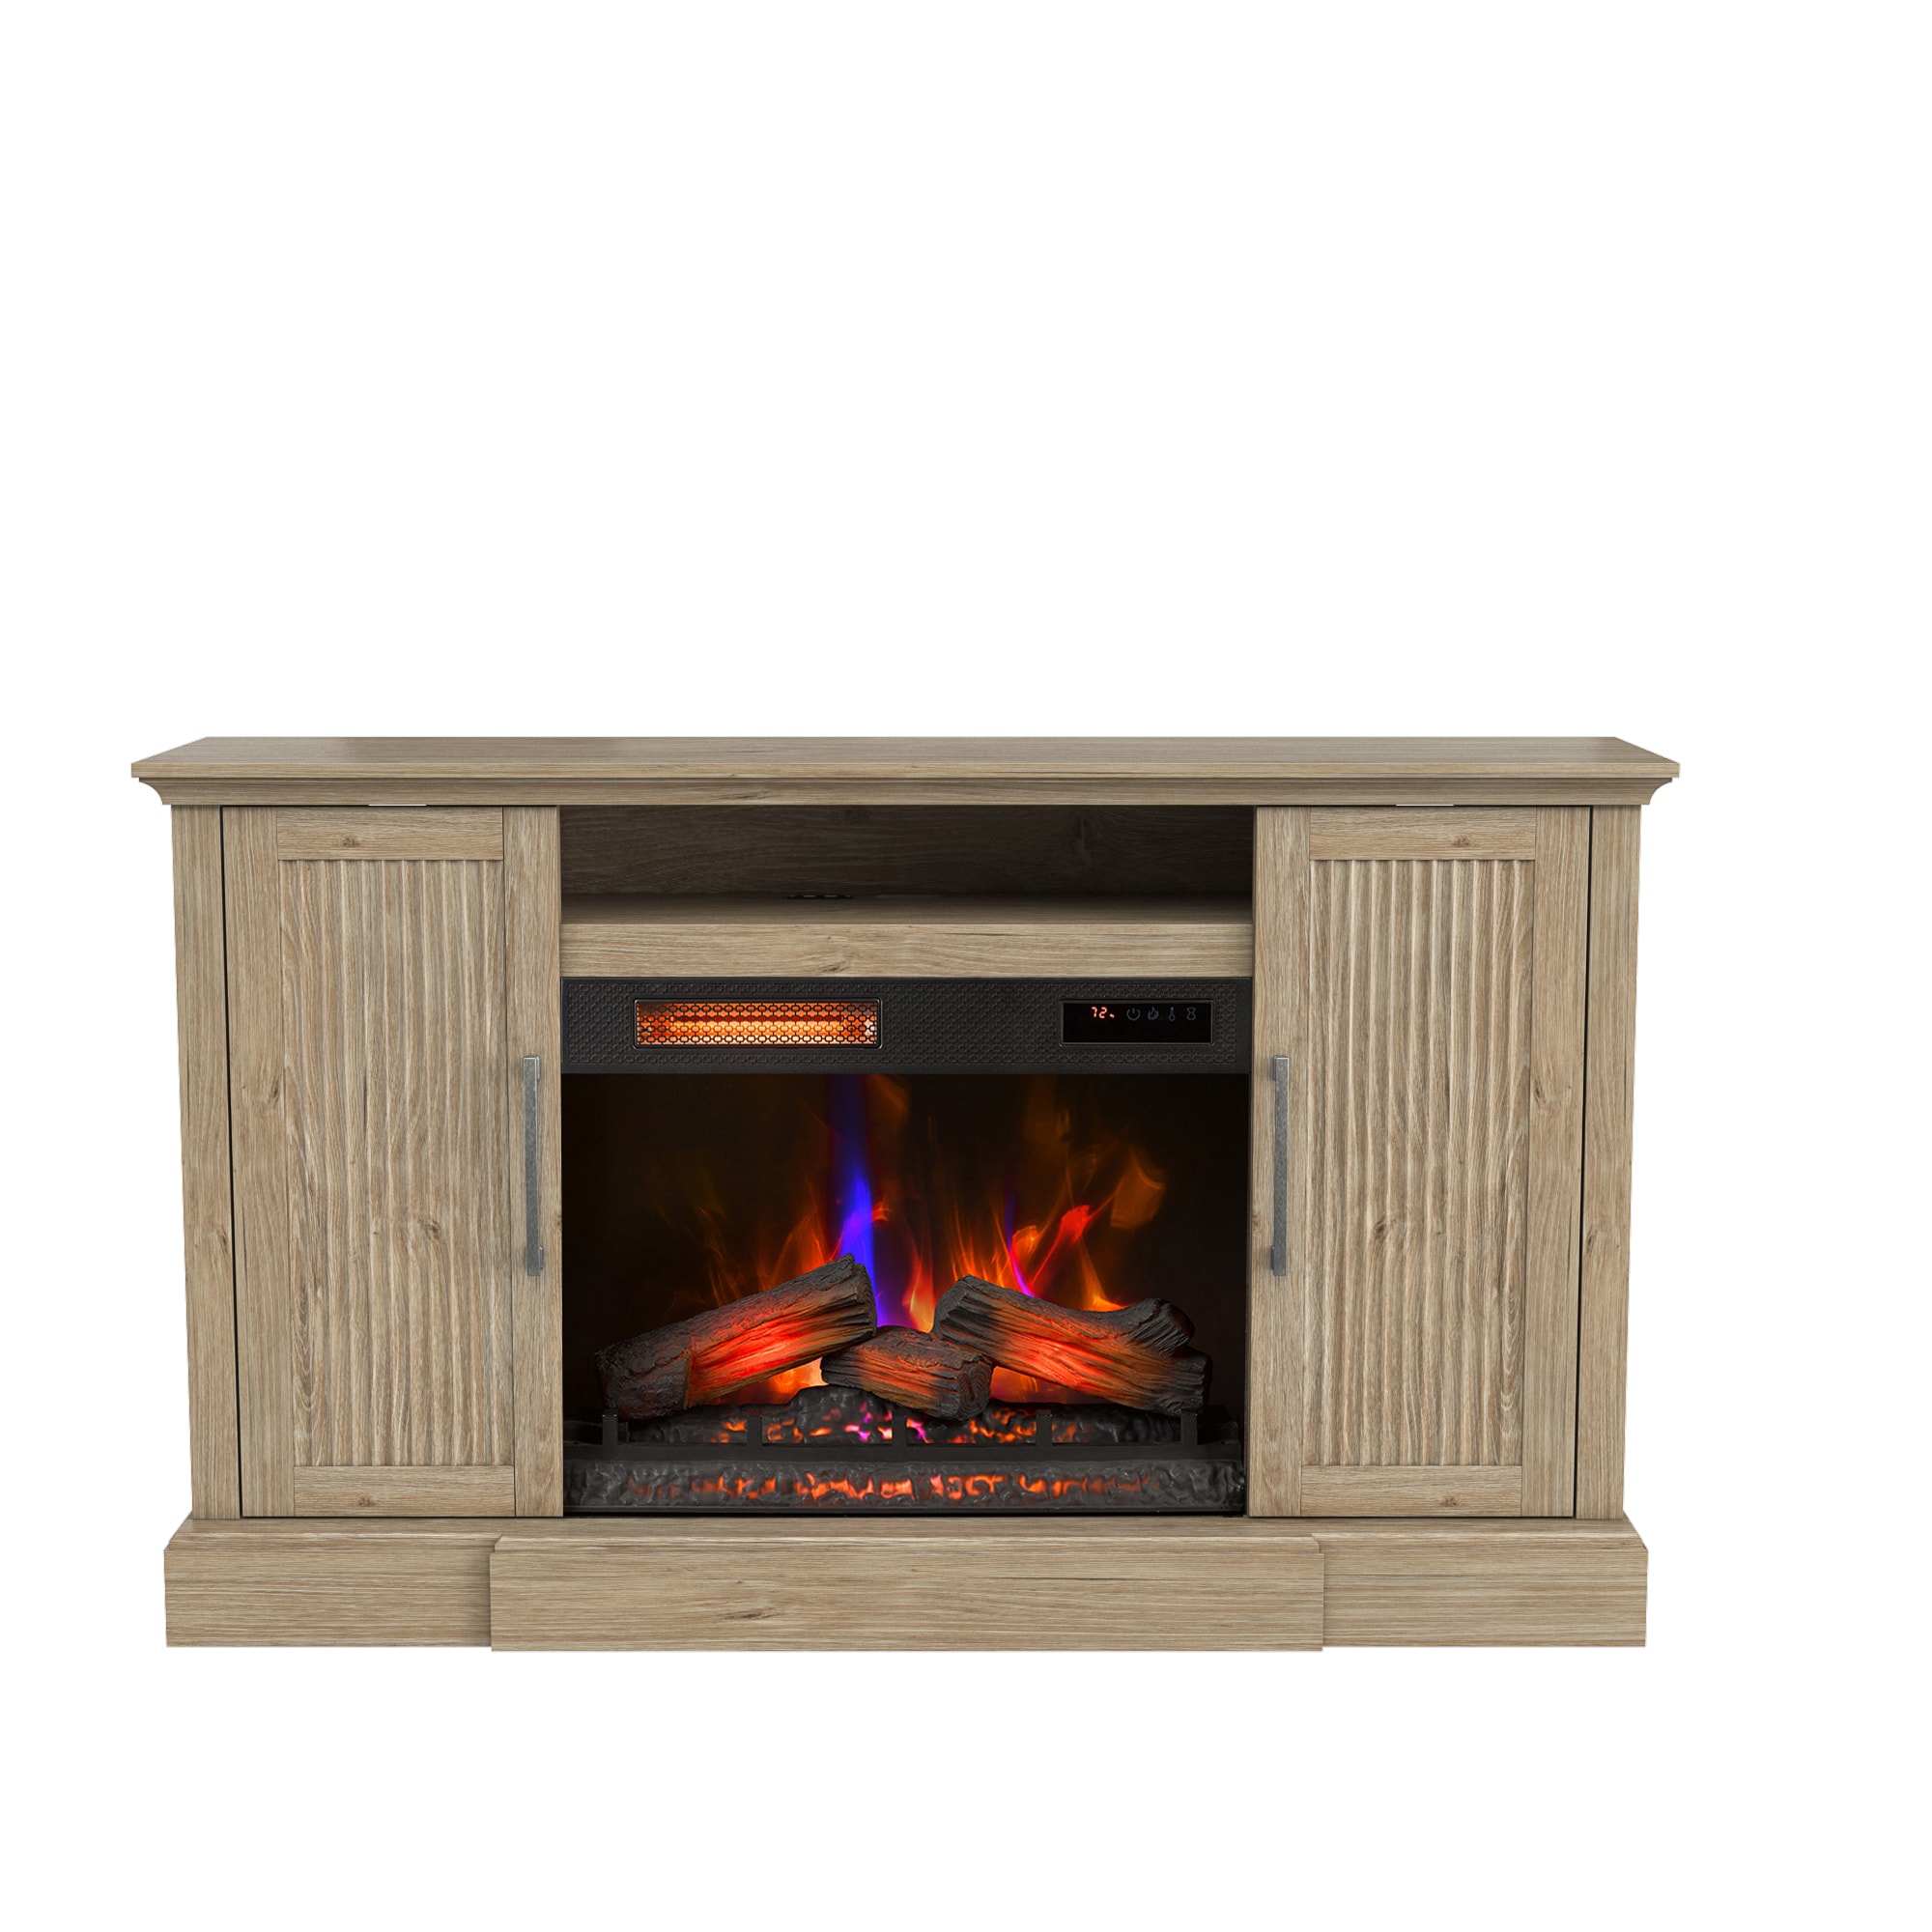 62-in W Natural Oak TV Stand with Infrared Quartz Electric Fireplace in Brown | - allen + roth 8000814